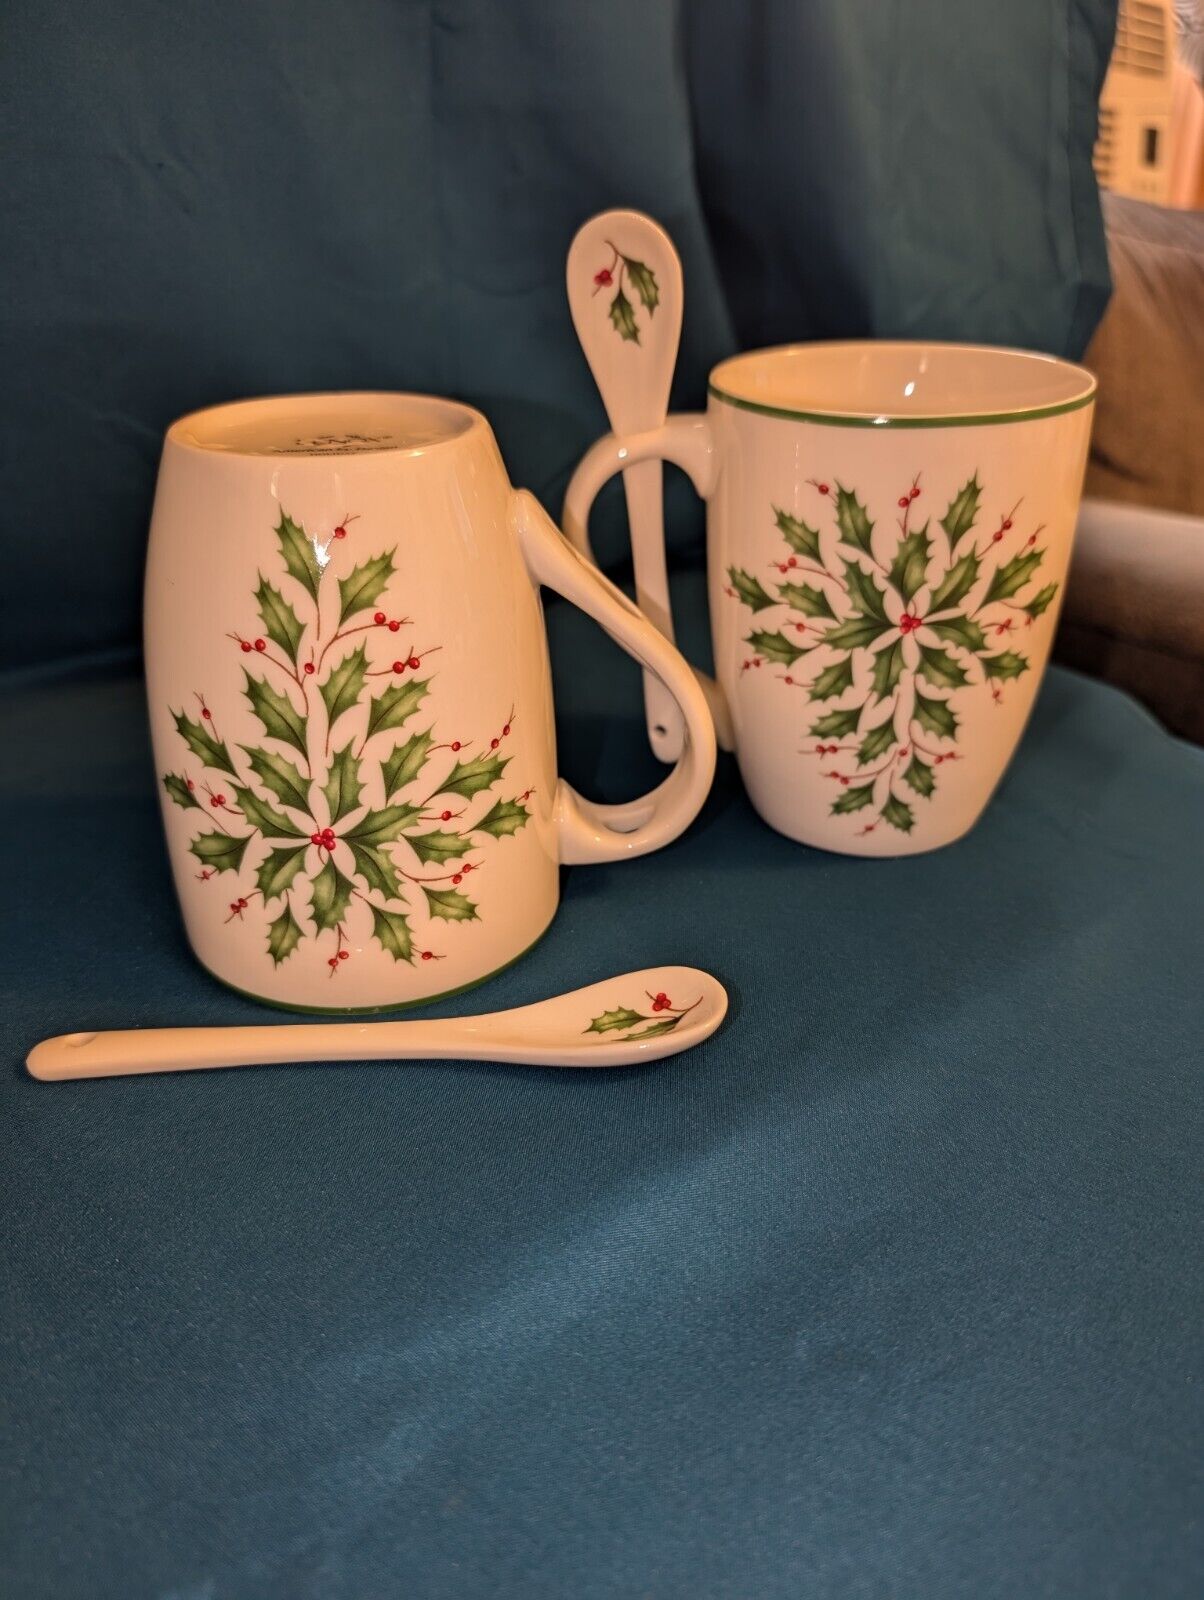 Lenox Holiday Cocoa/Coffee/Tea Cups Mugs With Porcelain Spoons Holly Christmas